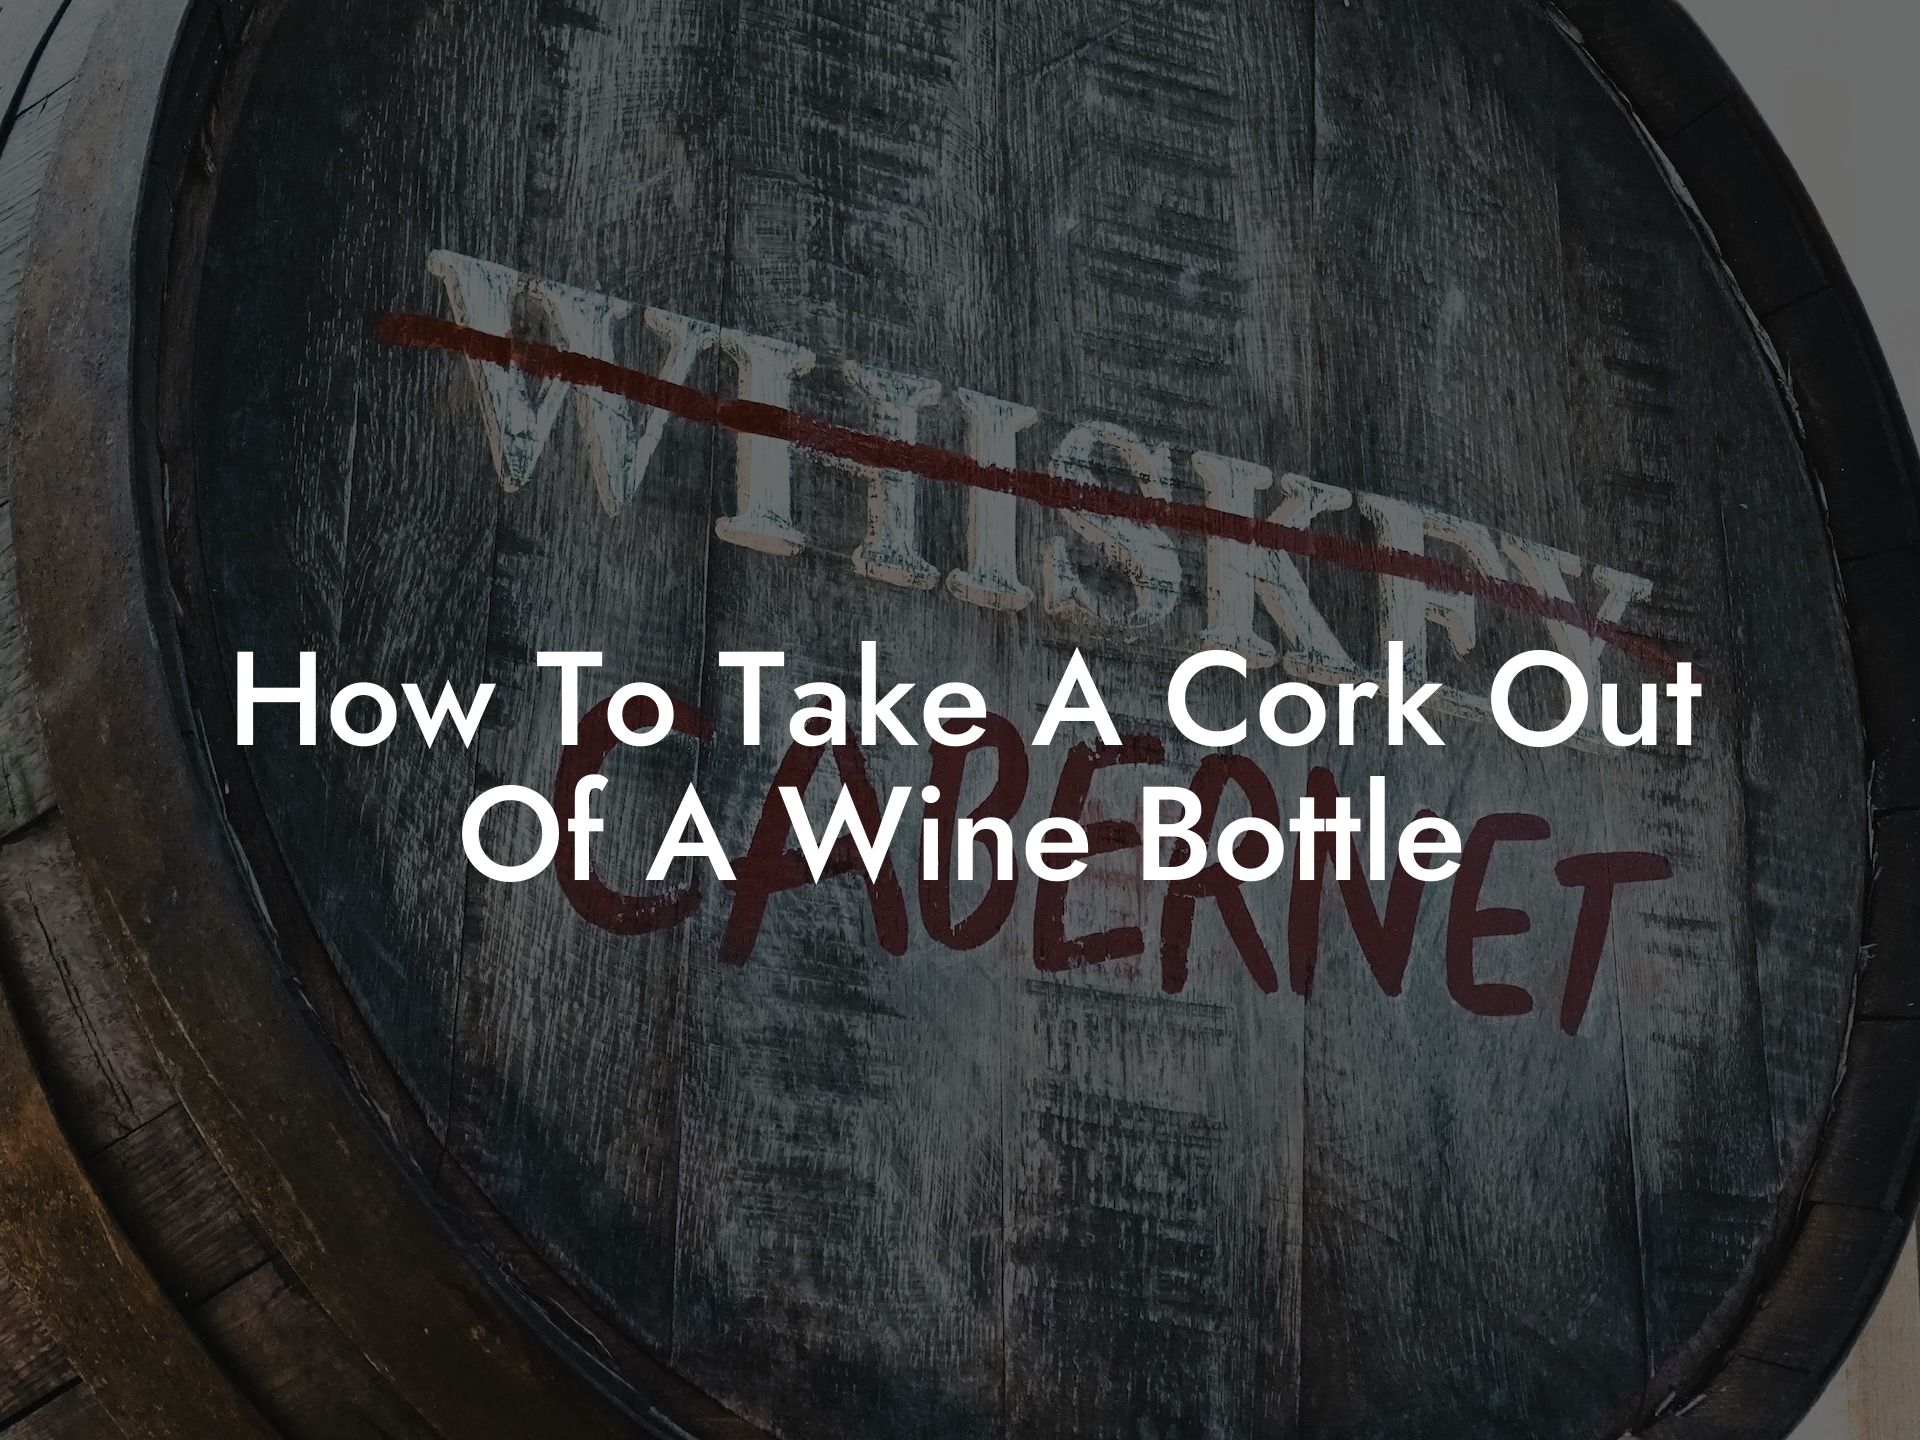 How To Take A Cork Out Of A Wine Bottle